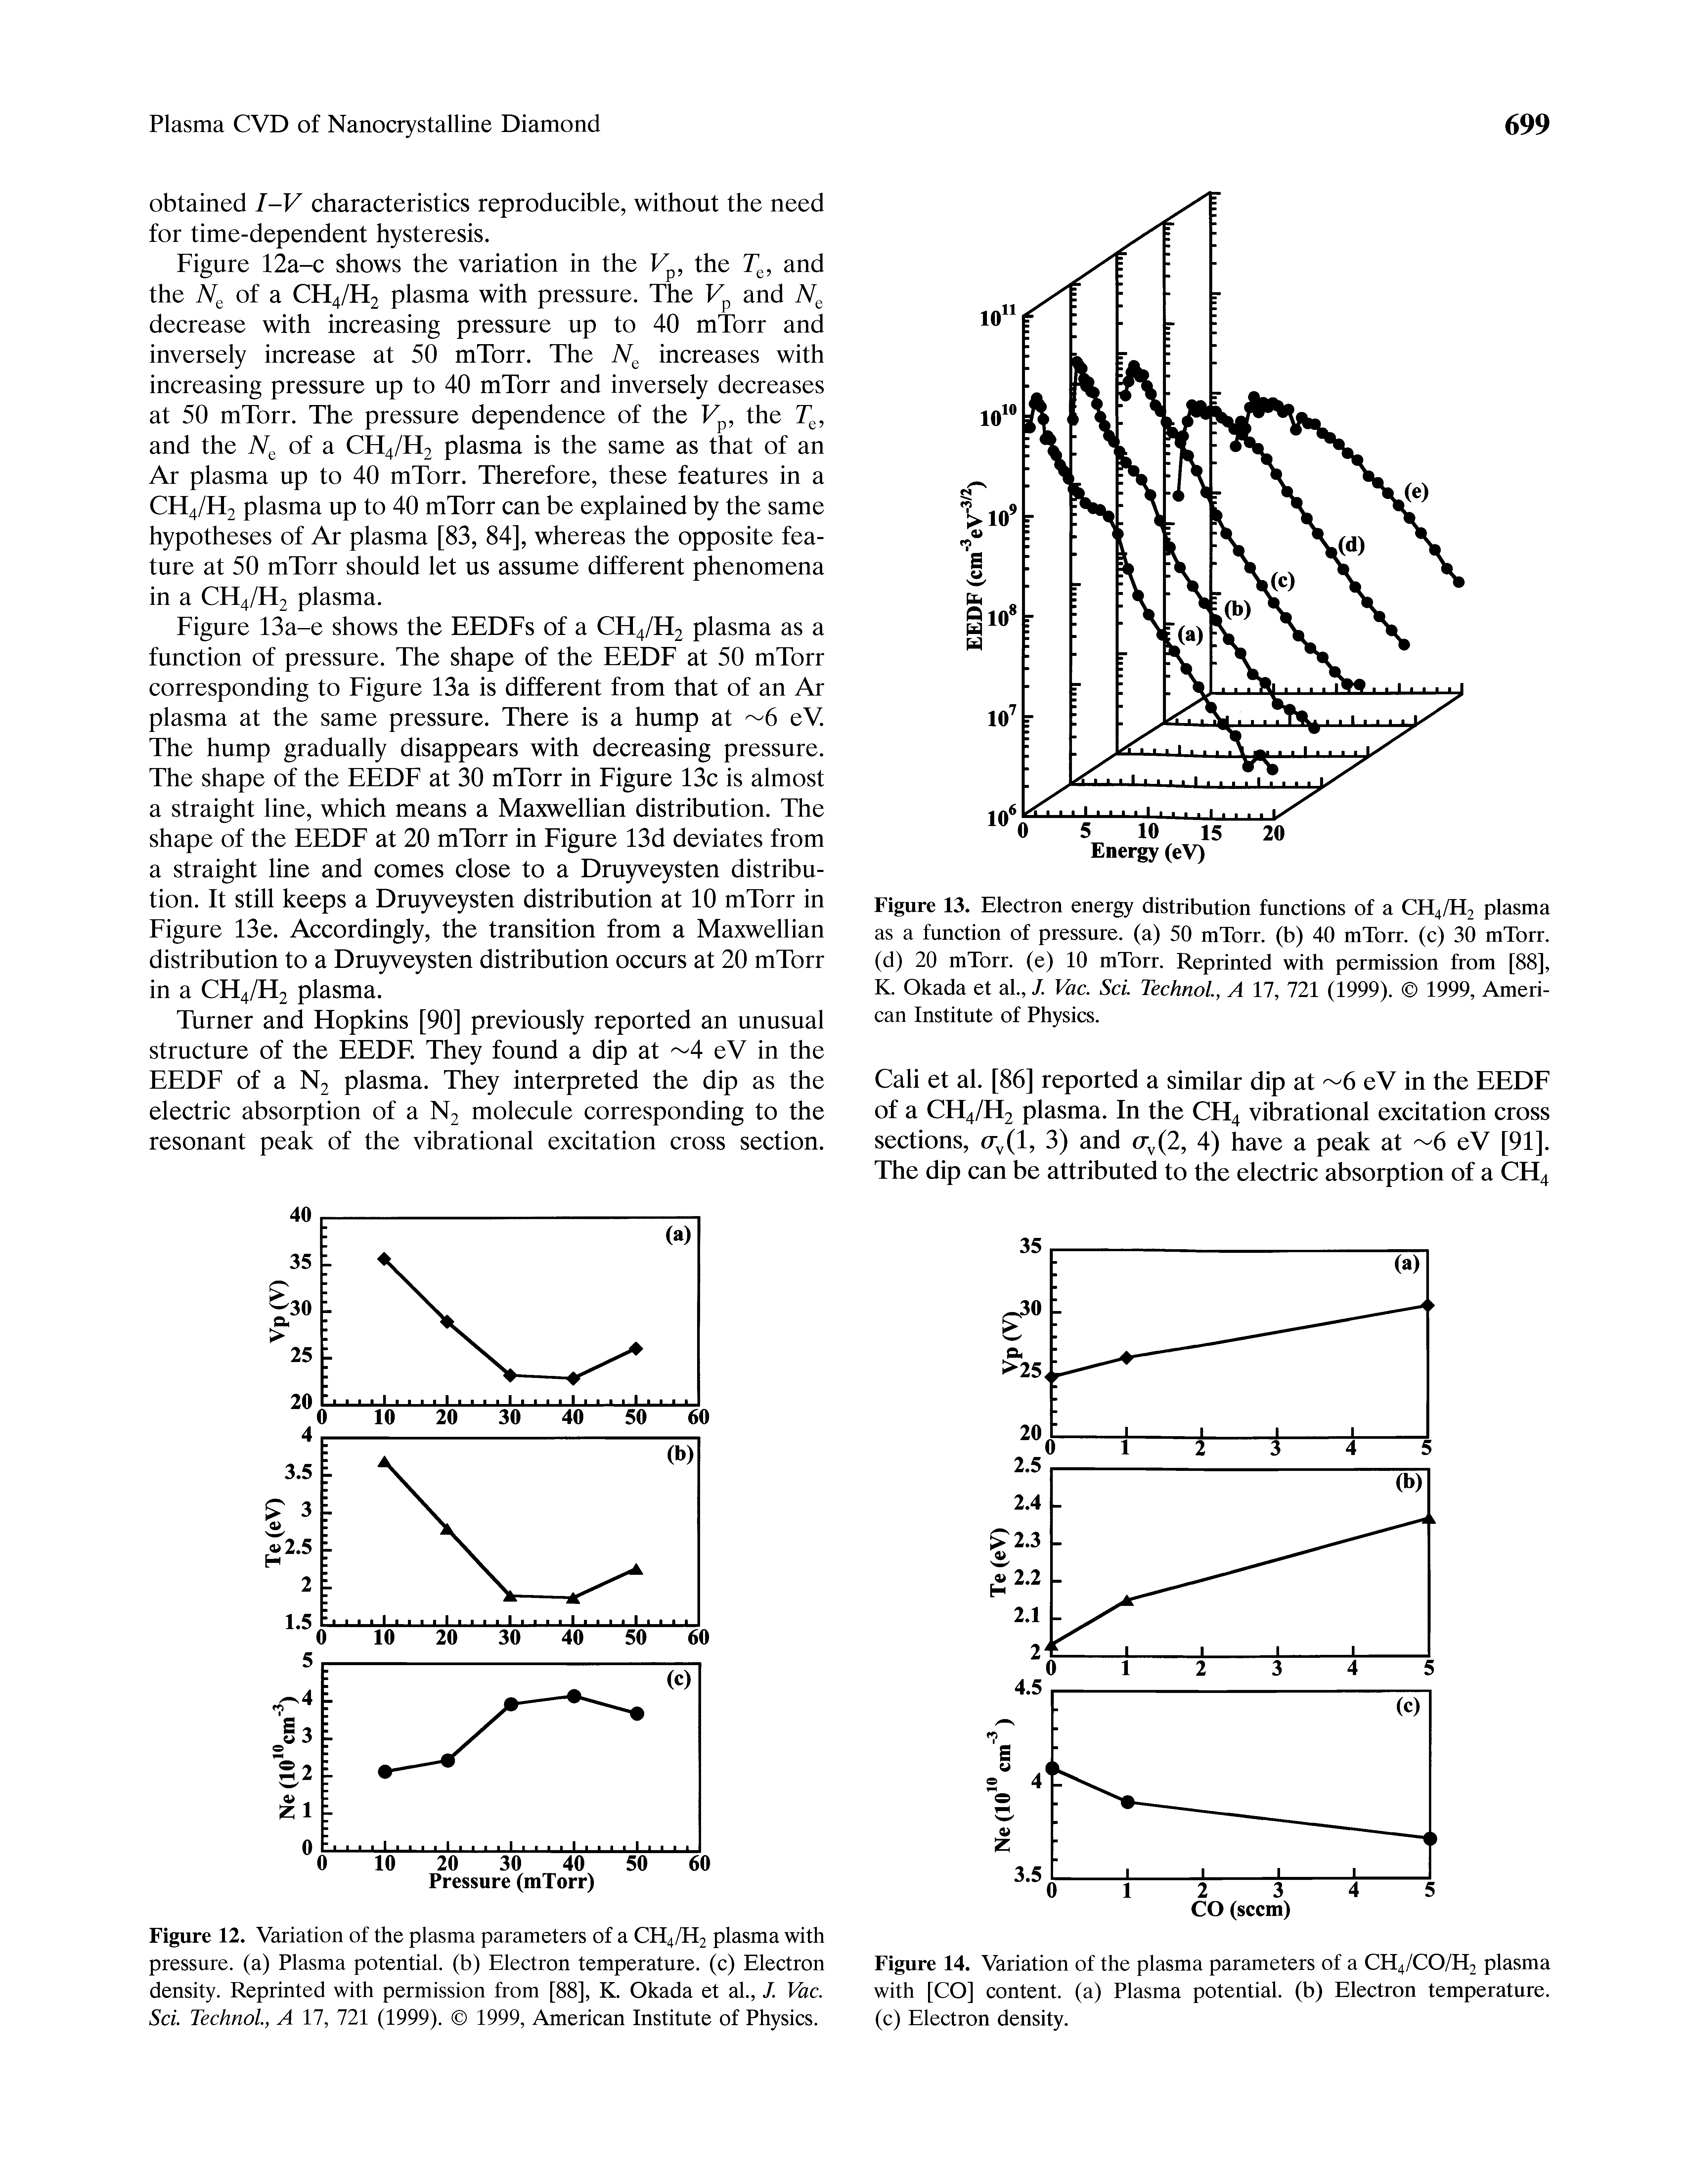 Figure 13. Electron energy distribution functions of a CH4/H2 plasma as a function of pressure, (a) 50 mTorr. (b) 40 mTorr. (c) 30 mTorr. (d) 20 mTorr. (e) 10 mTorr. Reprinted with permission from [88], K. Okada et al., J. Vac. Sci. TechnoL, A 17, 721 (1999). 1999, American Institute of Physics.